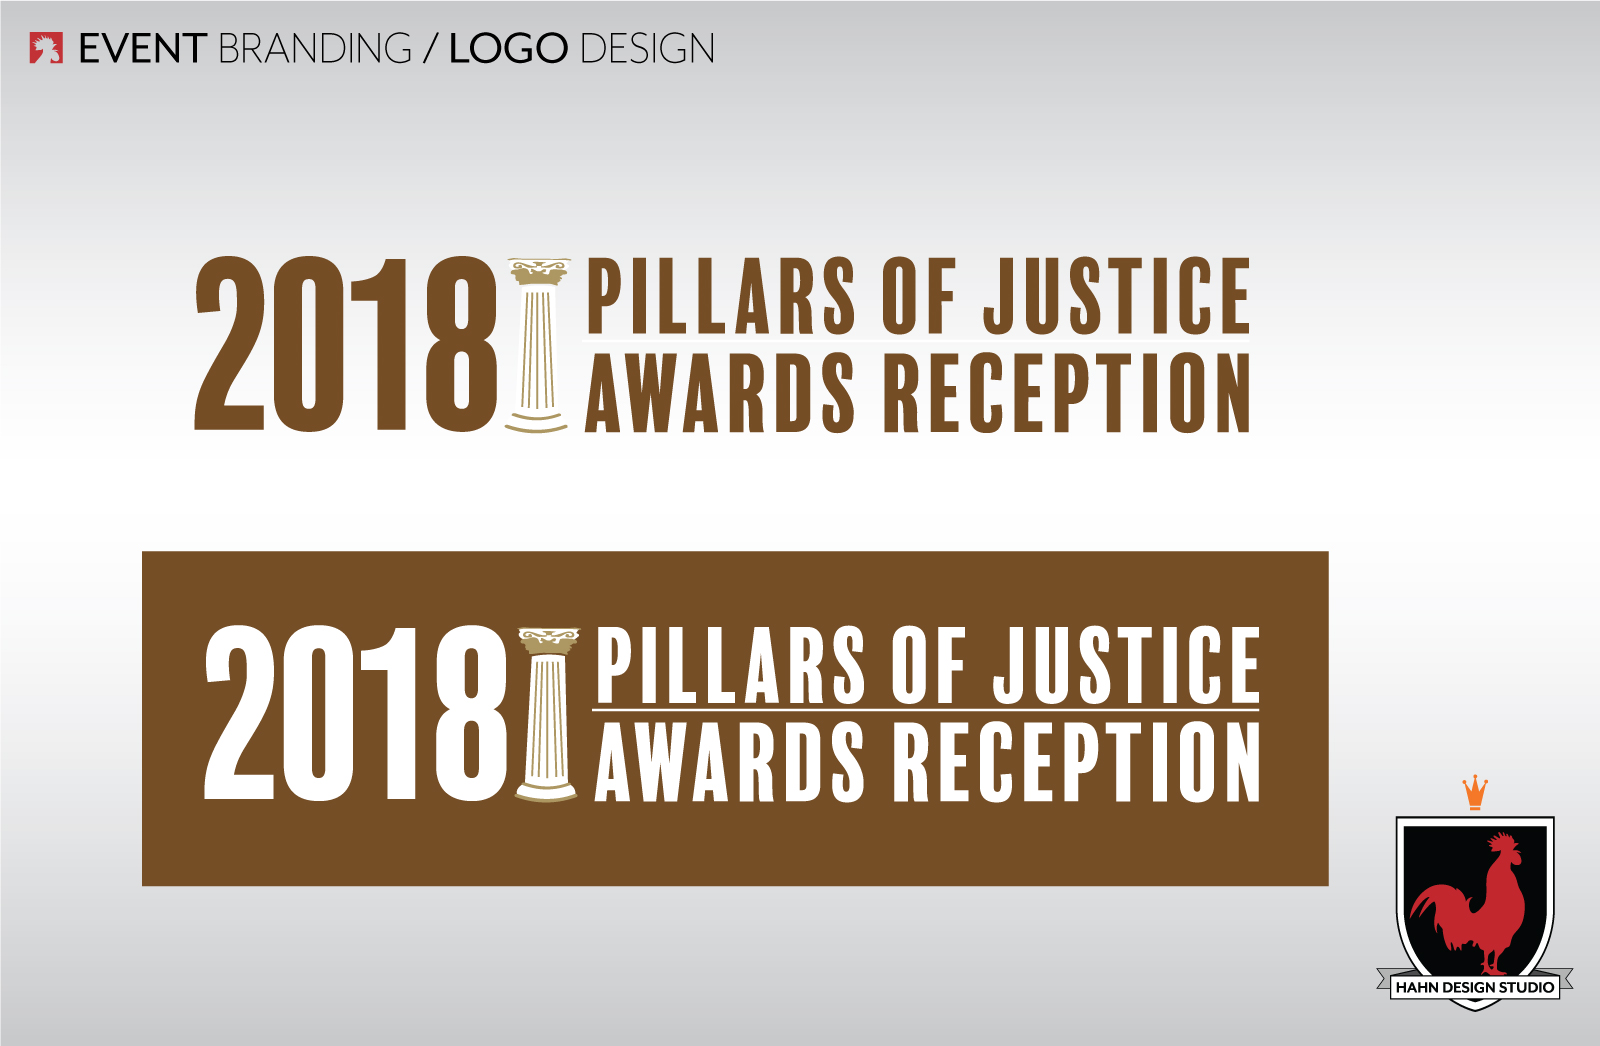 Event Branding Logo Design for 2018 Pillars of Justice Awards Reception for Chicago Appleseed Fund for Justice